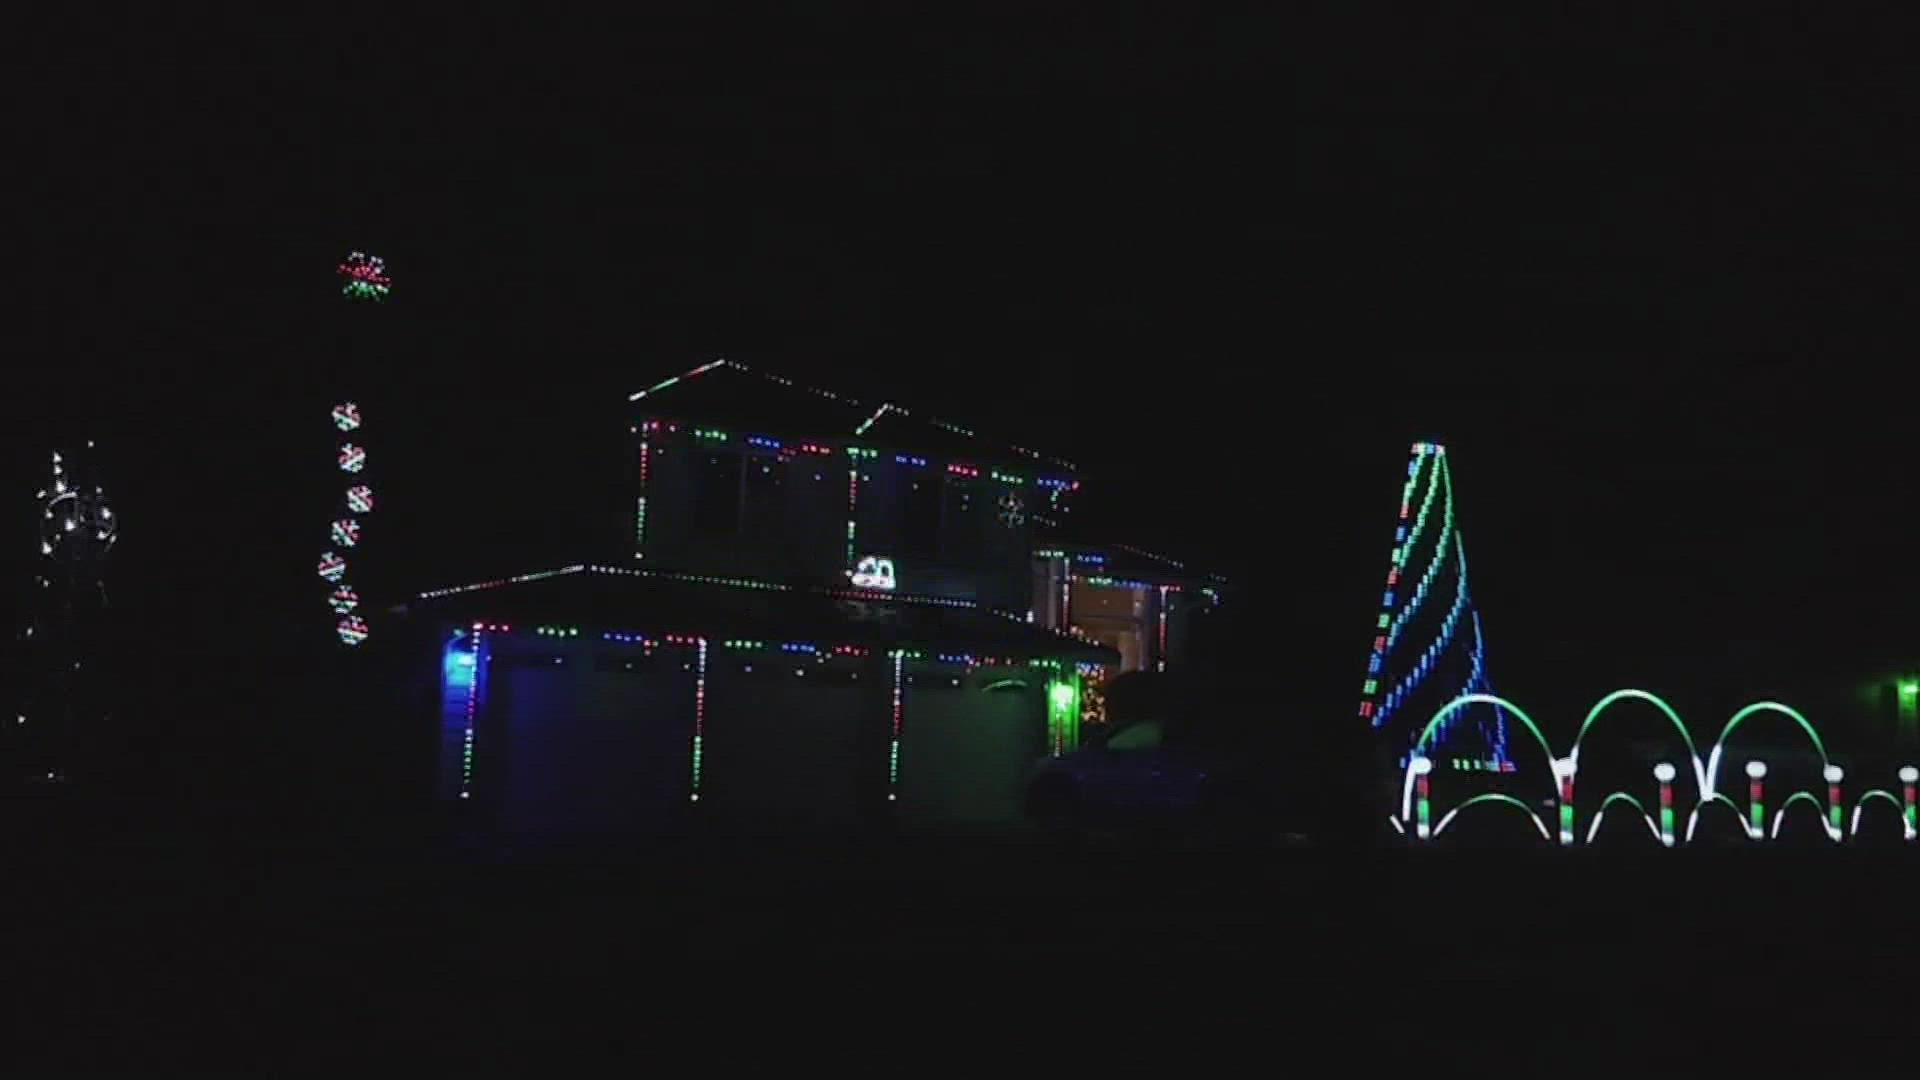 Craig Dye has been putting on his holiday light display for 15 years. Before he retires, he wants to draw attention to a good cause.